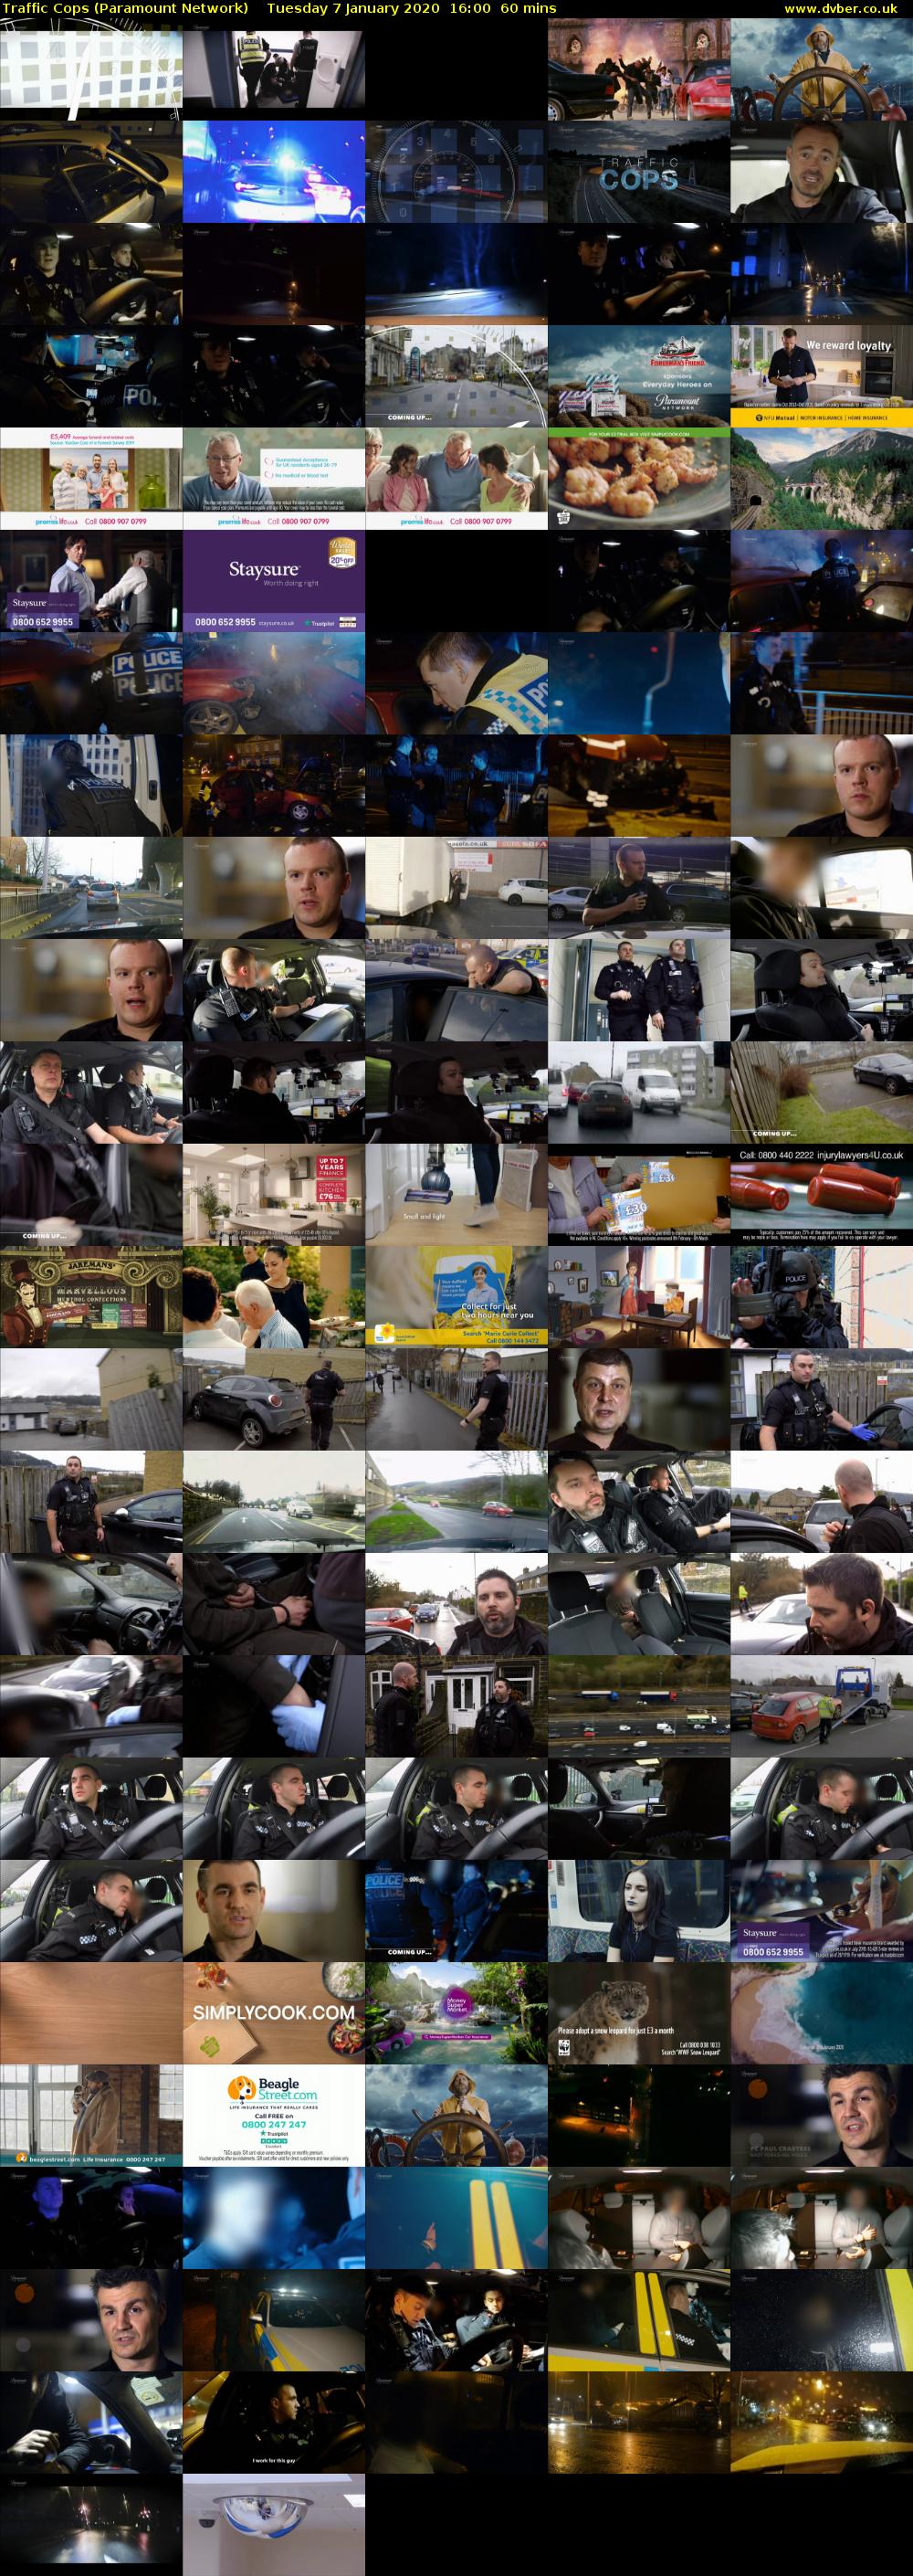 Traffic Cops (Paramount Network) Tuesday 7 January 2020 16:00 - 17:00